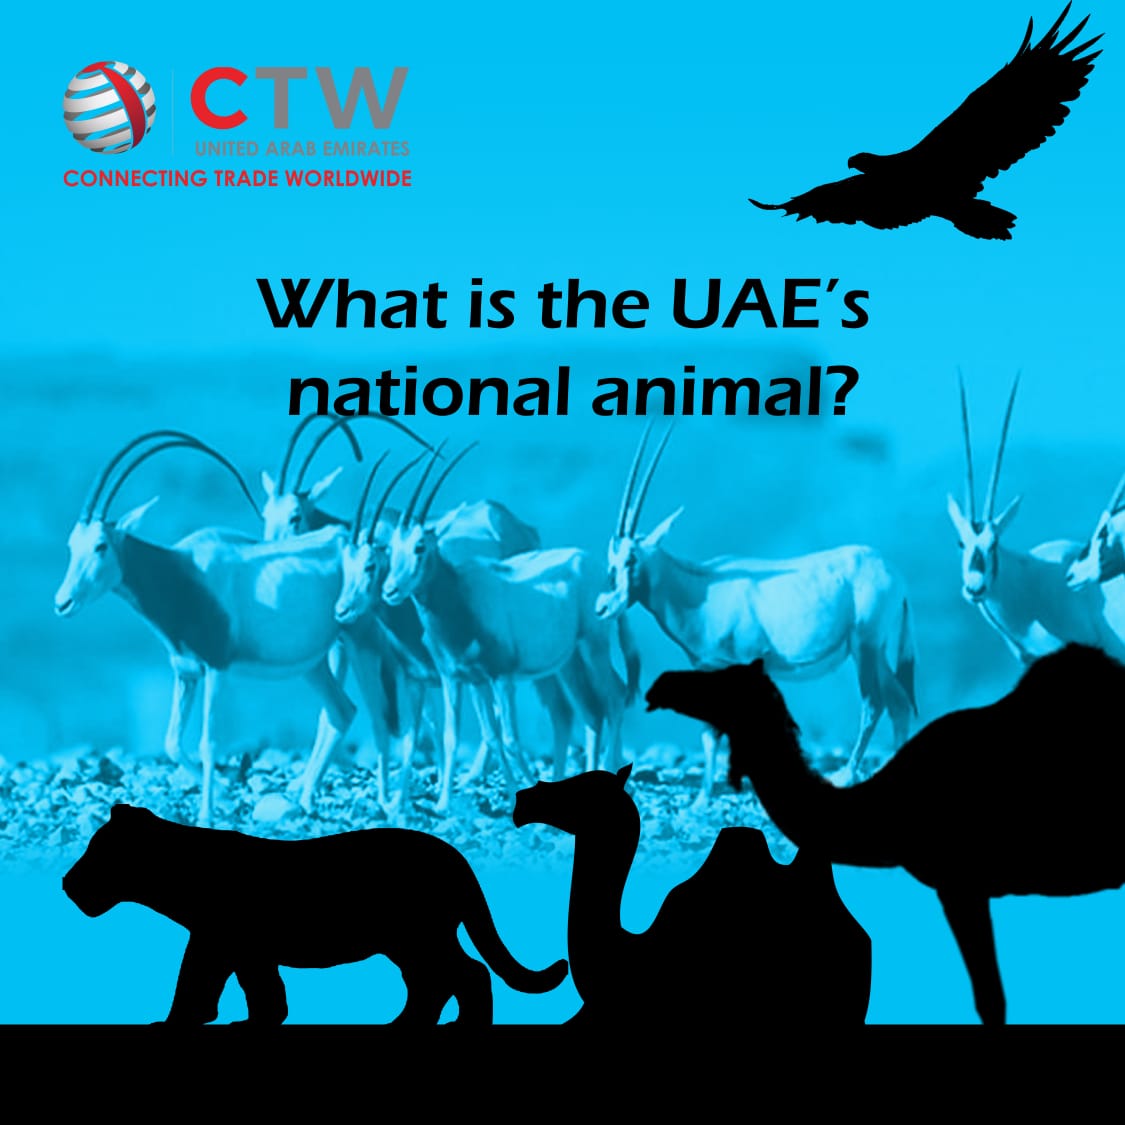 Trivia Tuesday 🤔
How much do you know about the UAE? Share your answers in the comments below 😀

#CTW2022 #Dubai #GlobalTradeShow #GlobalTradeConnect #B2BMarketPlace #TradeExpo #Businesses #BusinessExposure #Growth #BusinessInsights #BusinessConference #BusinessConnect